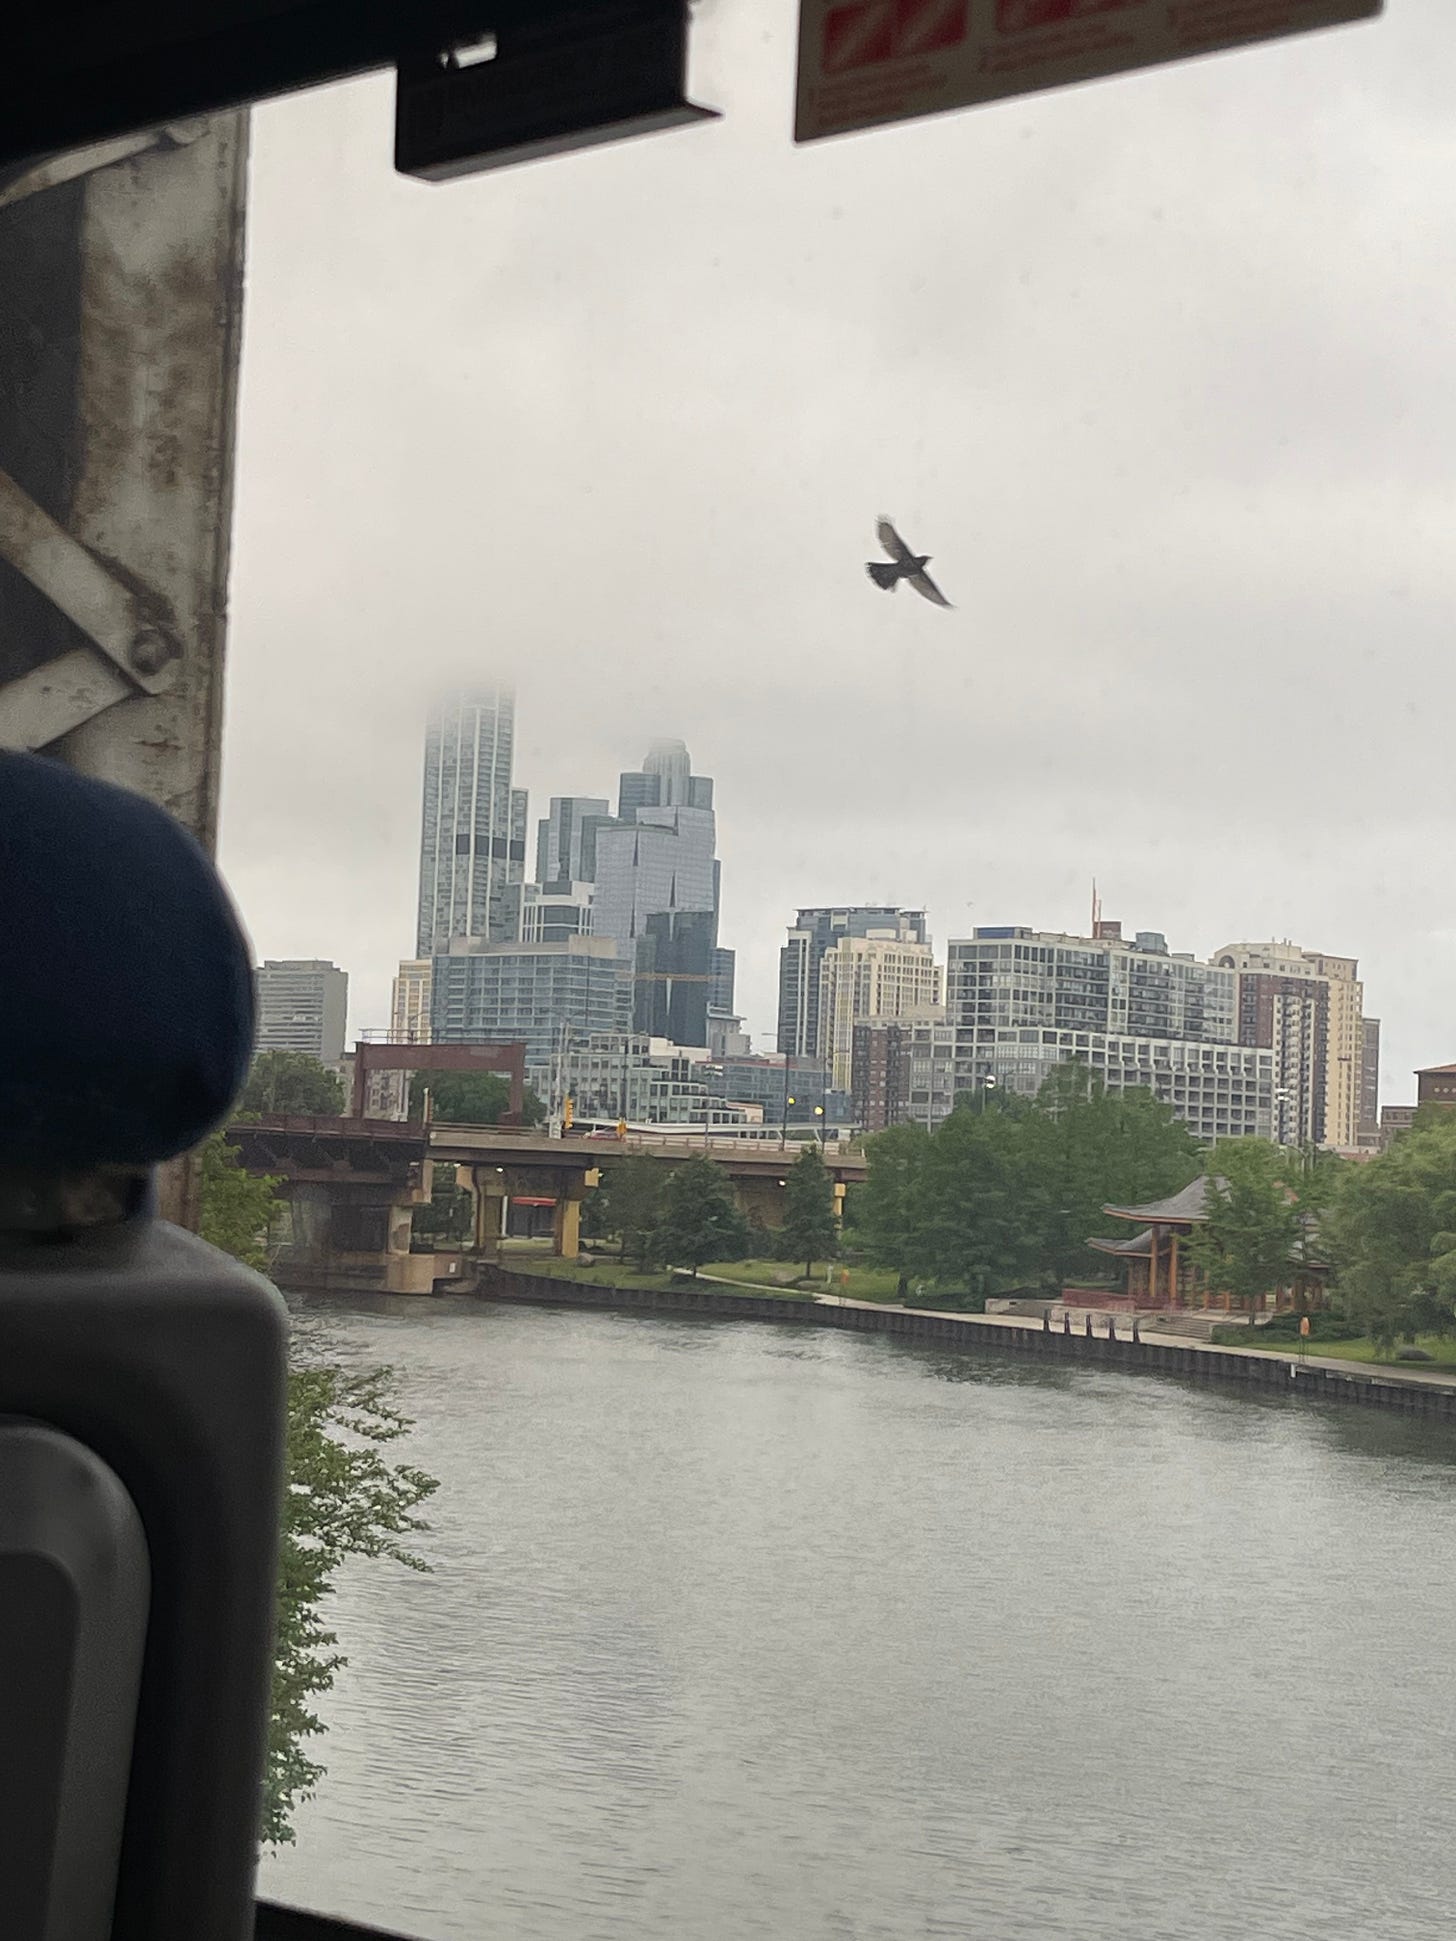 a view of the Chicago skyline. the sky is foggy, obscuring the tops of buildings. we are inside of a train car. we see parts of a bridge and a bird flying across the sky.